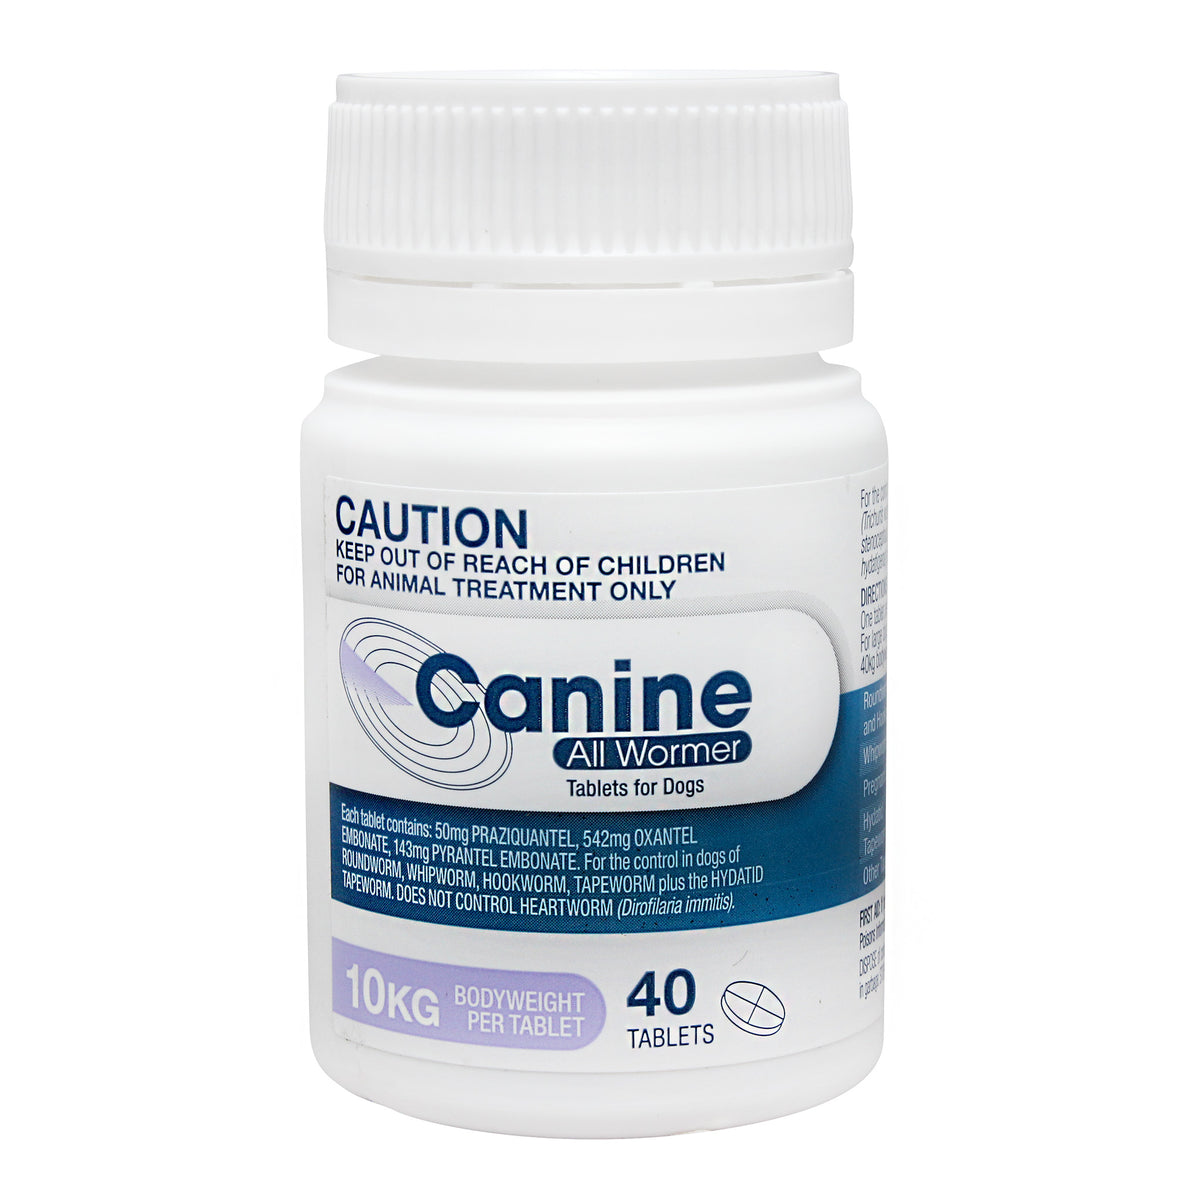 Value Plus Canine All Wormer Tablets